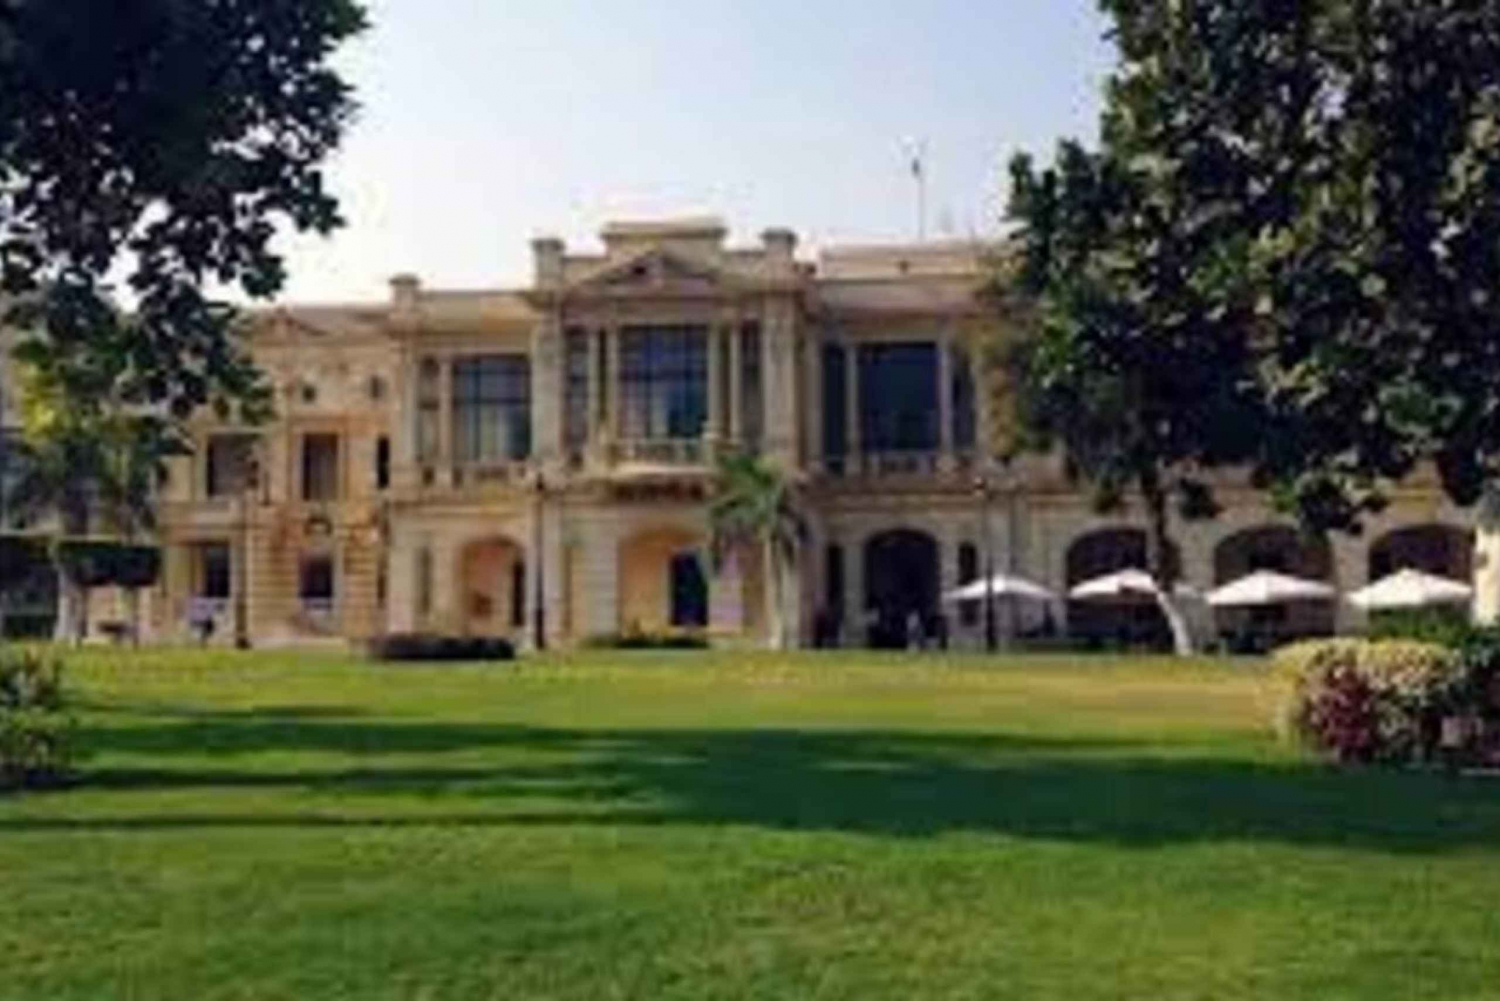 Half Day Tour To Abdeen Palace in Cairo